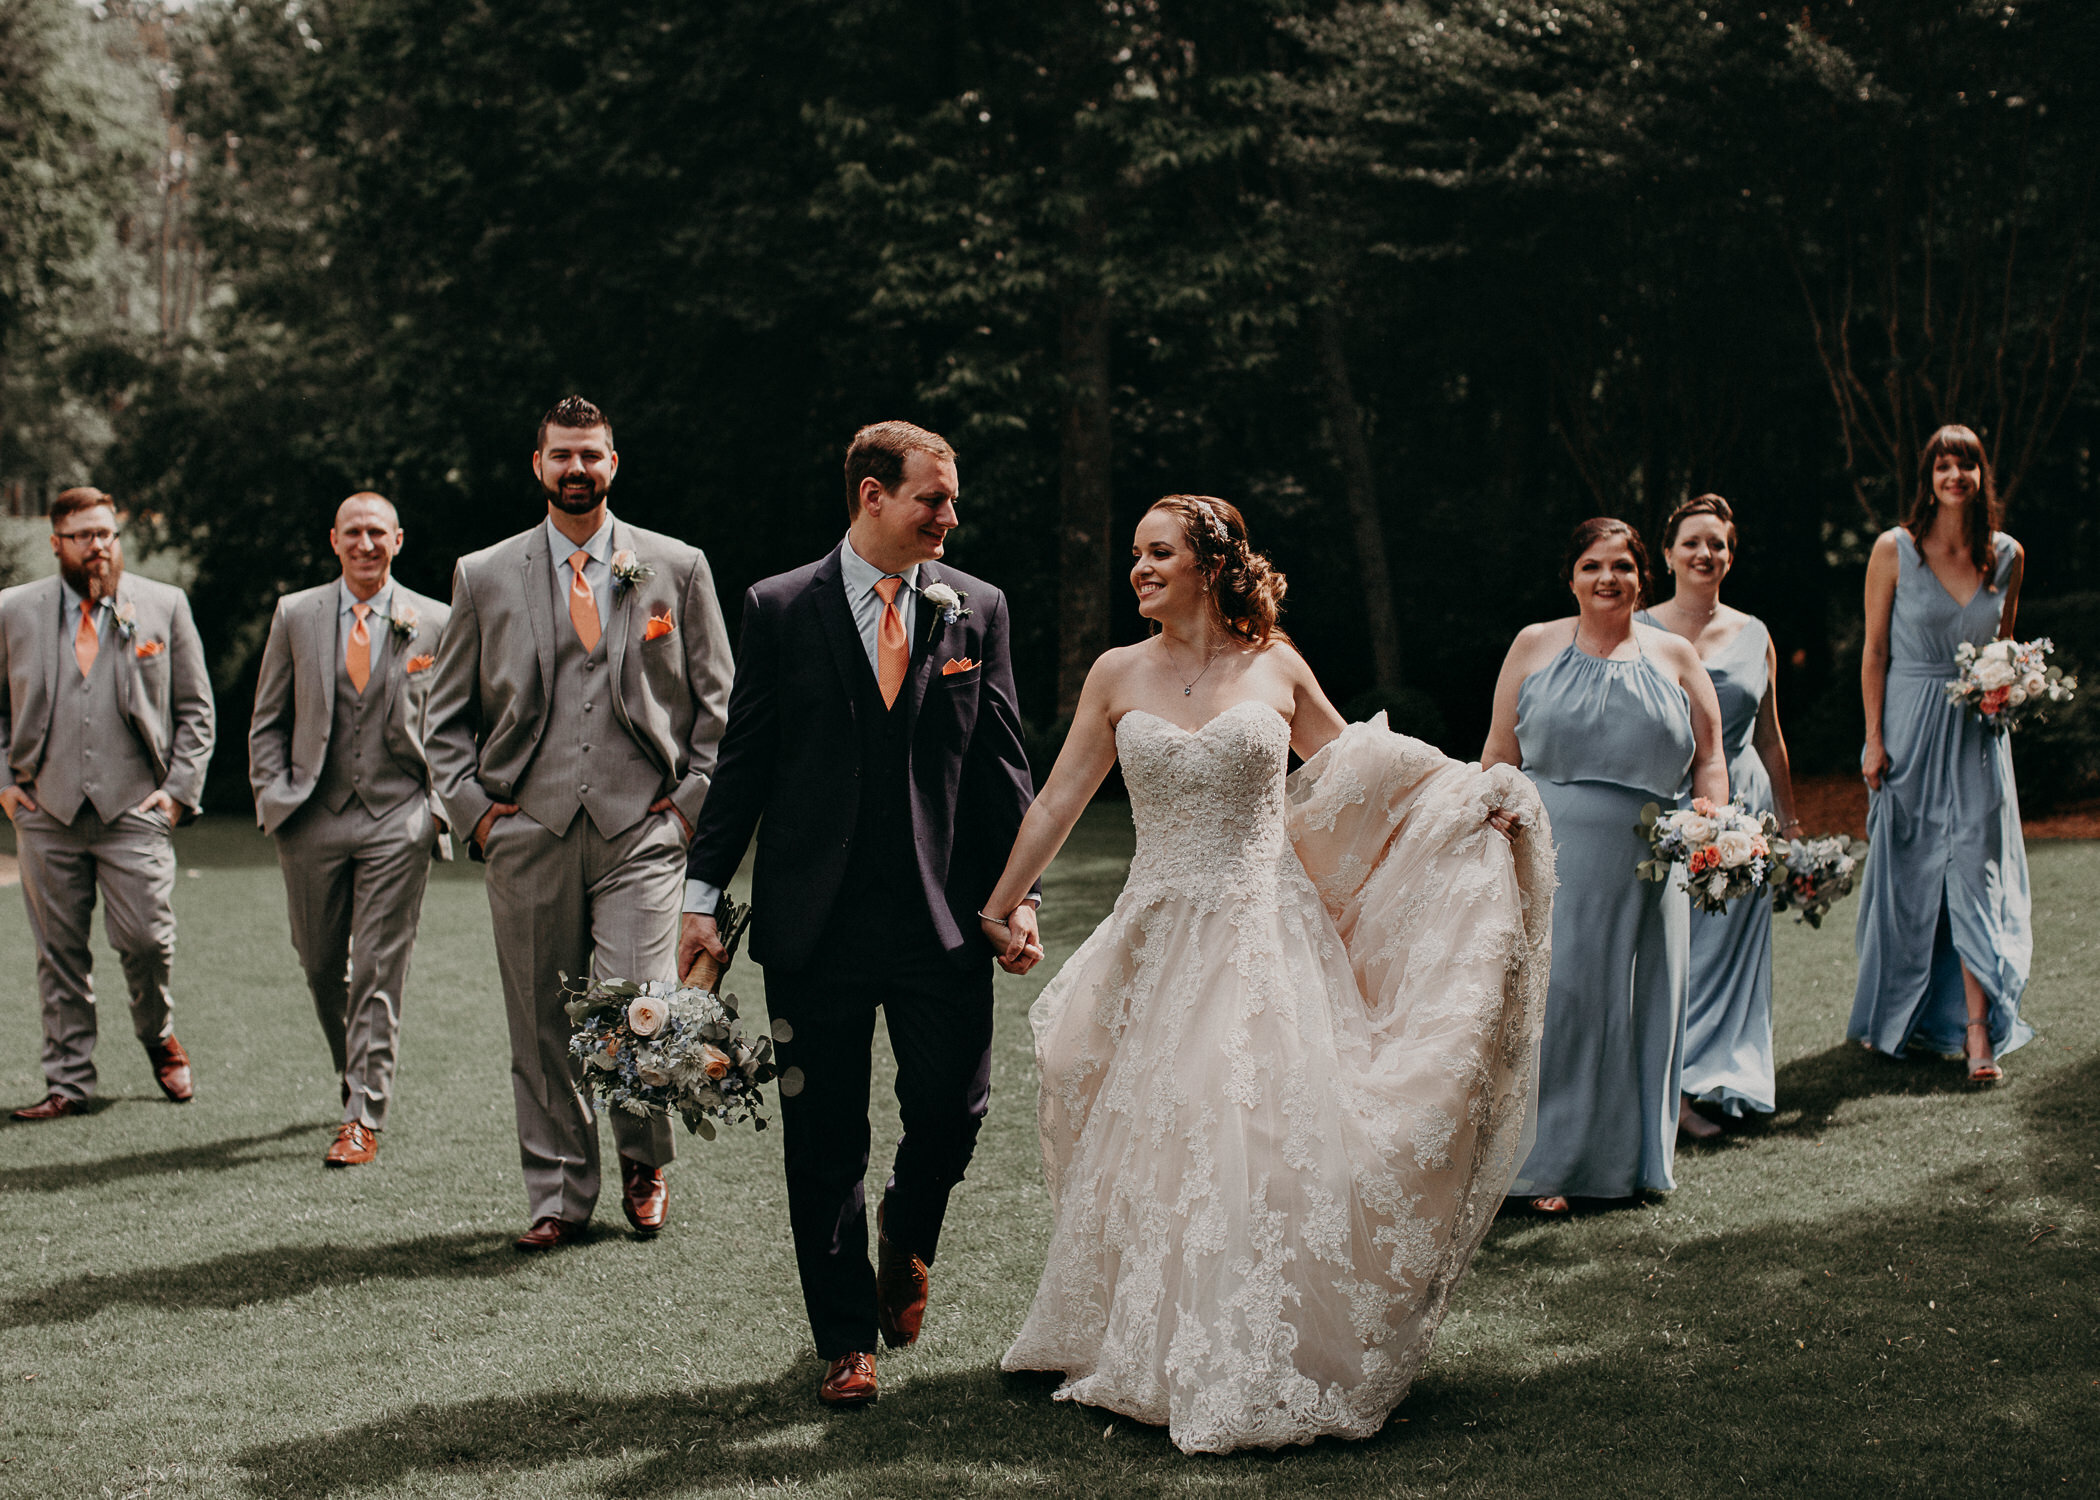 Christa & Ben's Wedding Day || Atlanta Spring Wedding at The Country Club of The South34.jpg